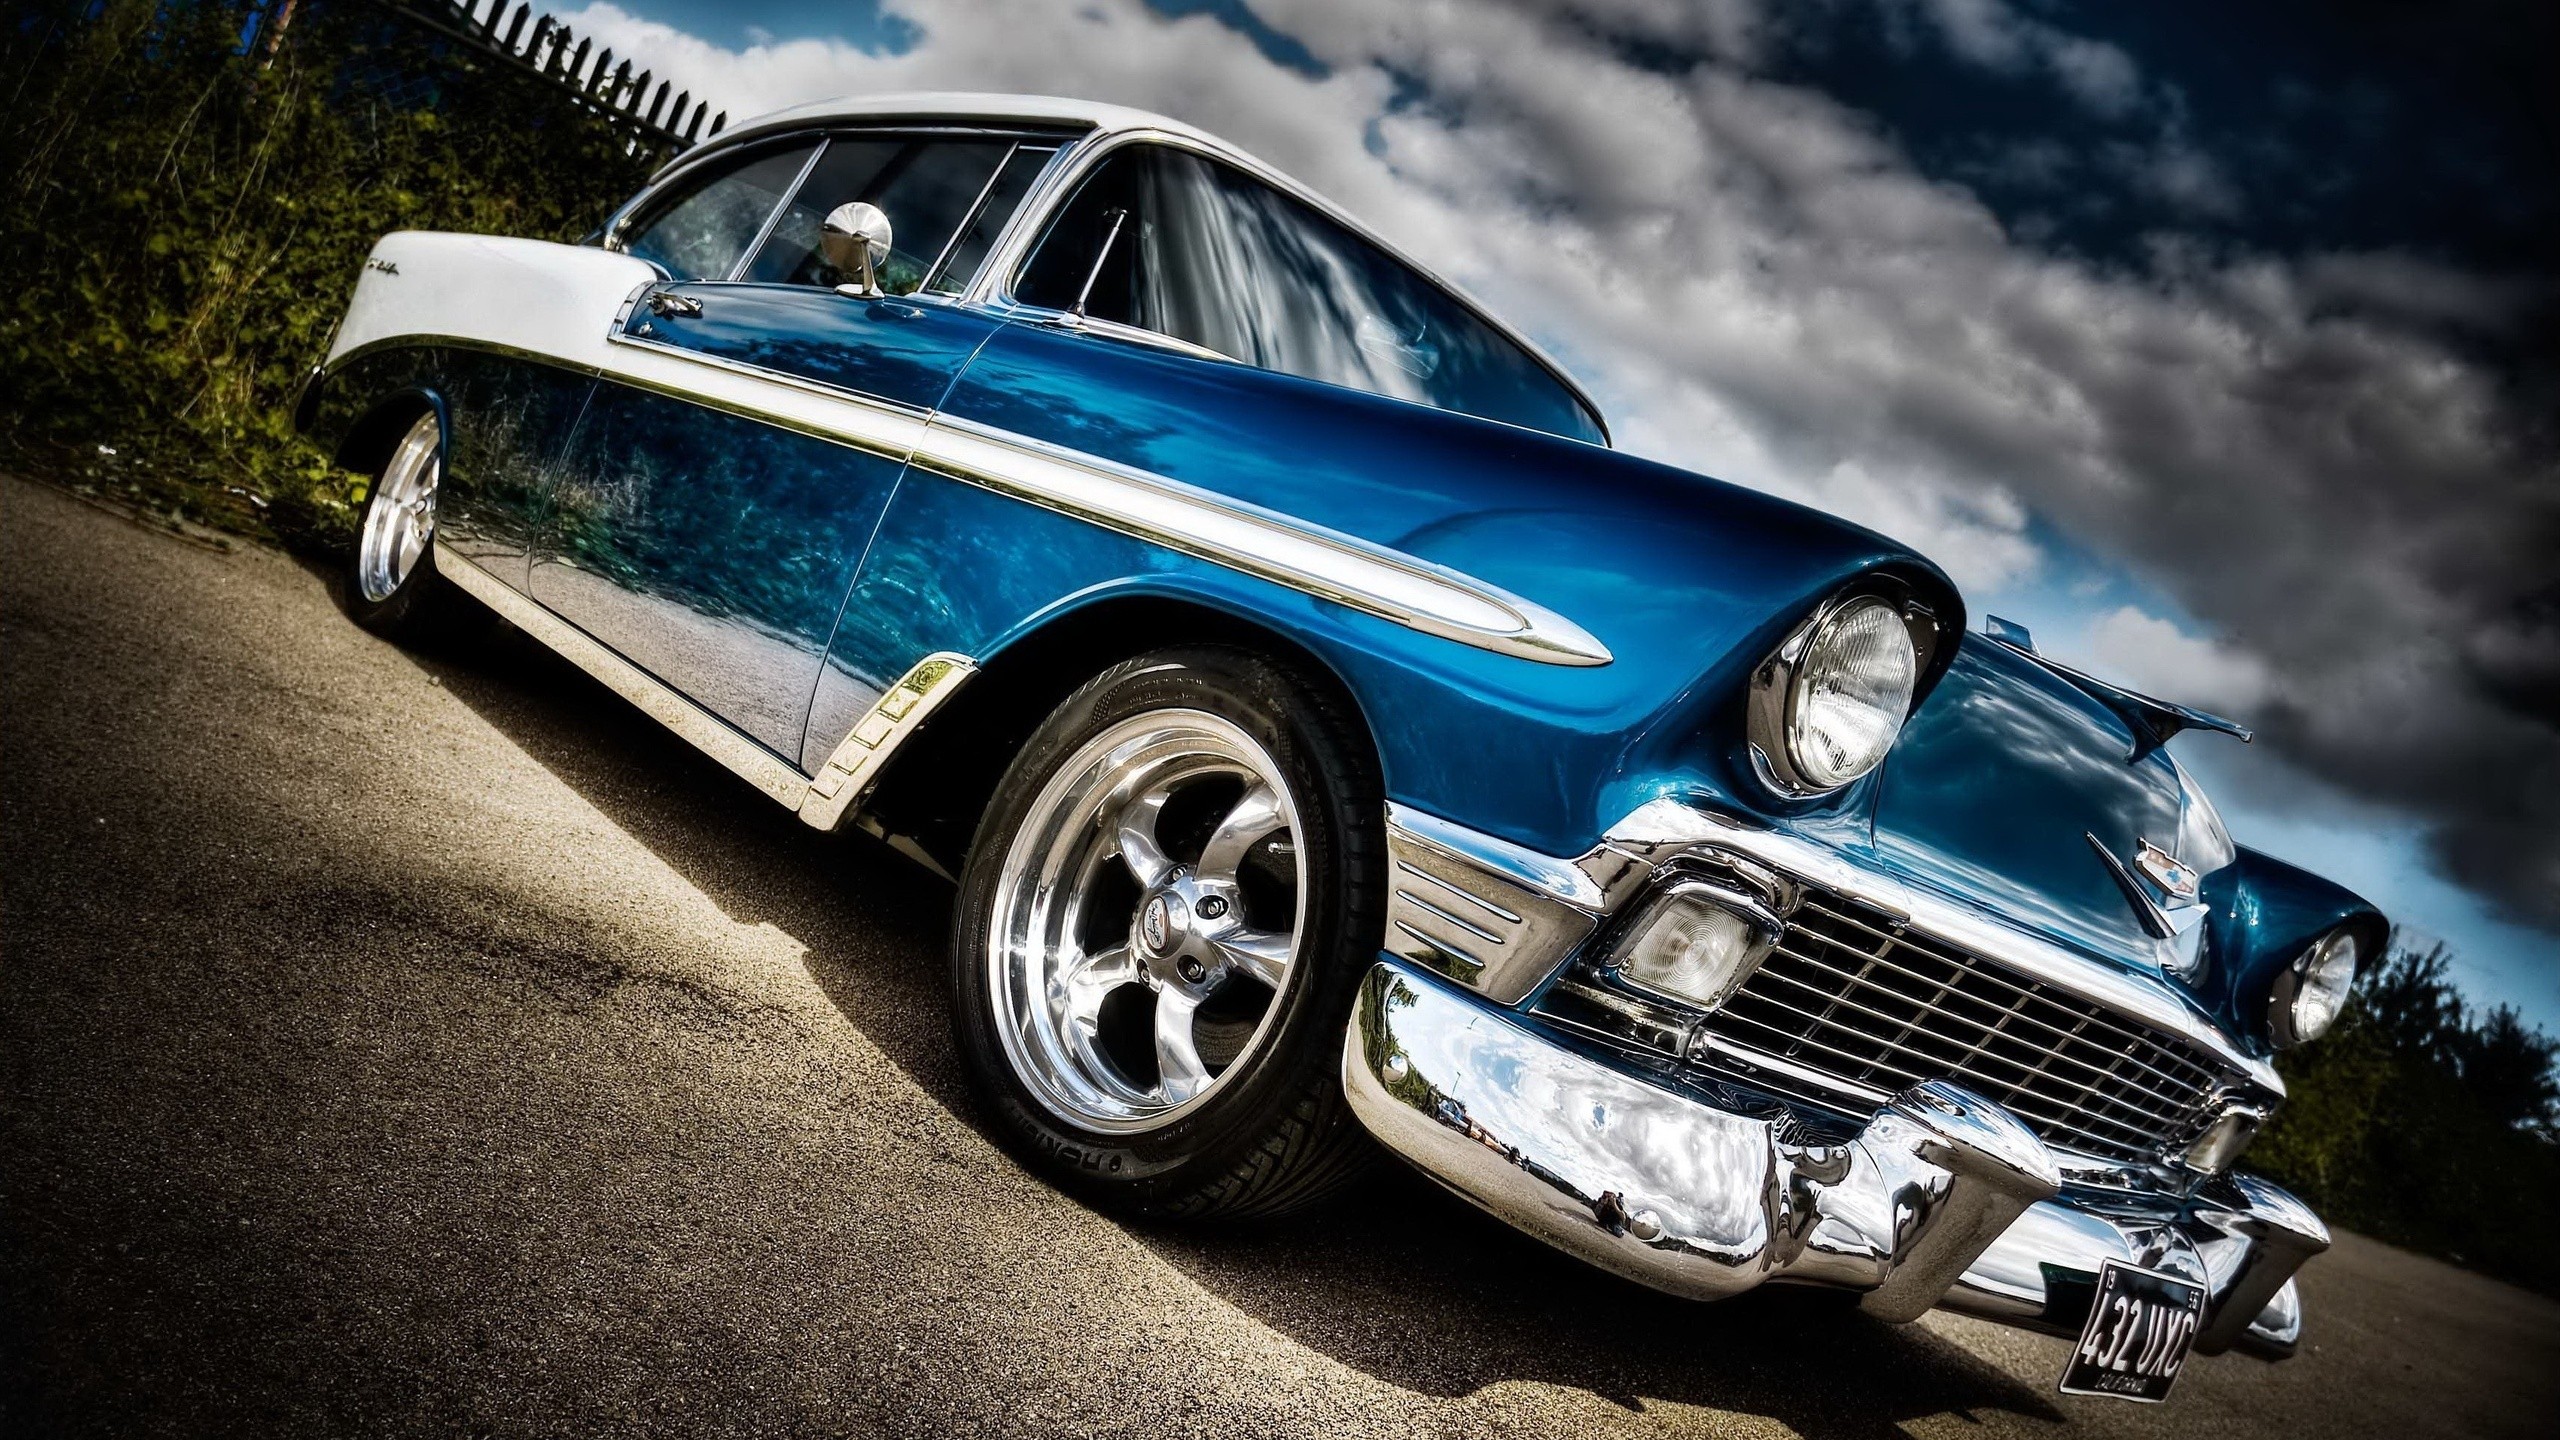 General 2560x1440 classic car car vehicle Chevrolet Bel Air low-angle Chevrolet blue cars numbers American cars